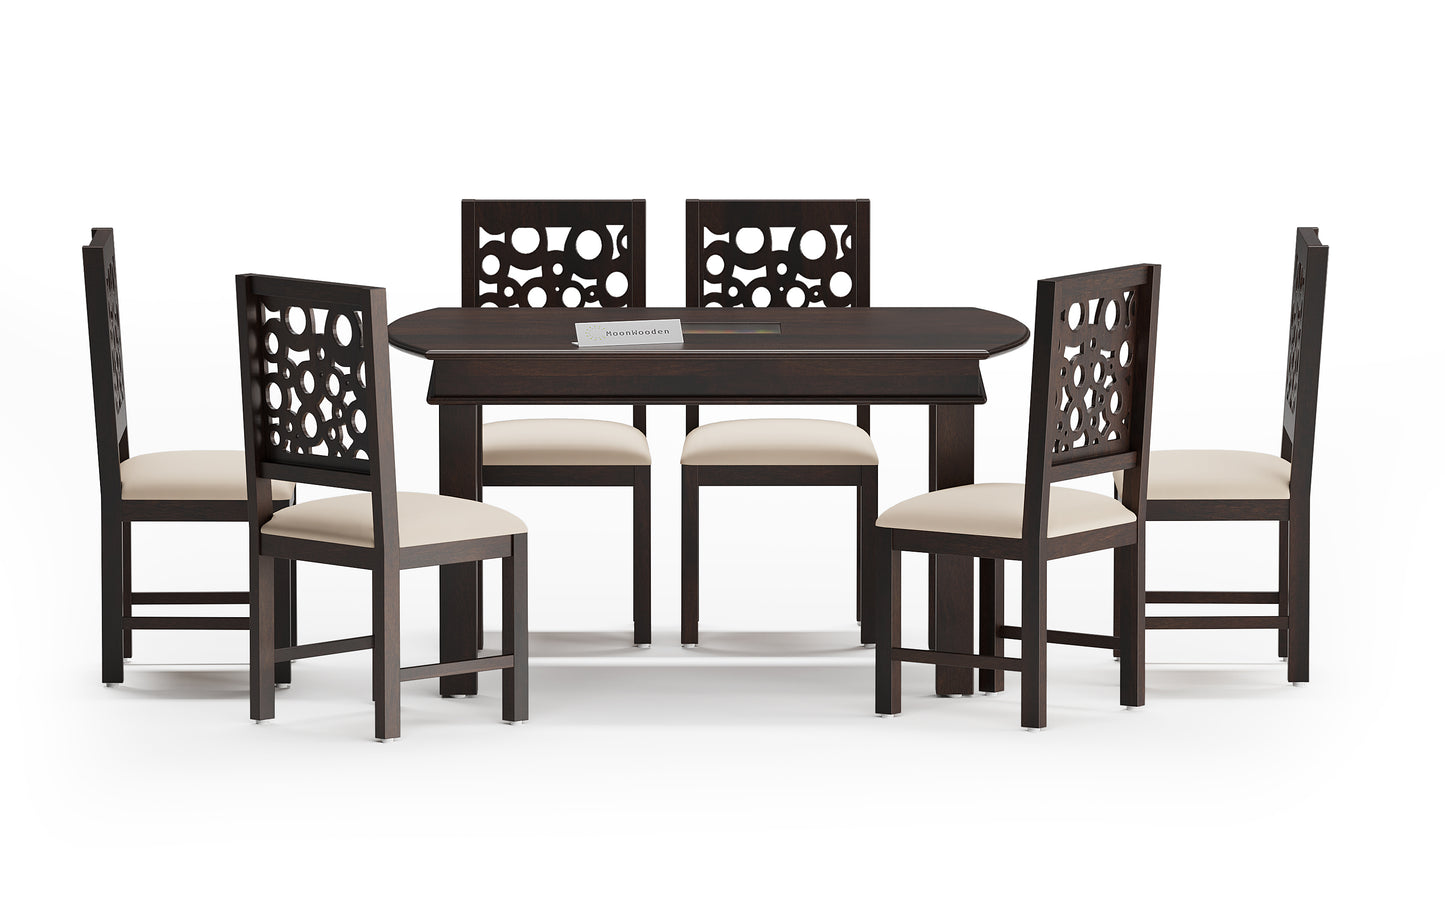 MoonWooden Sheesham Wooden Dining Table 6 Seater | Six Seater Dinning Table with 6 Chairs for Home | Dining Room Sets for Restraunts |Top Round Degine| Sheesham Wood, Dark Walnut